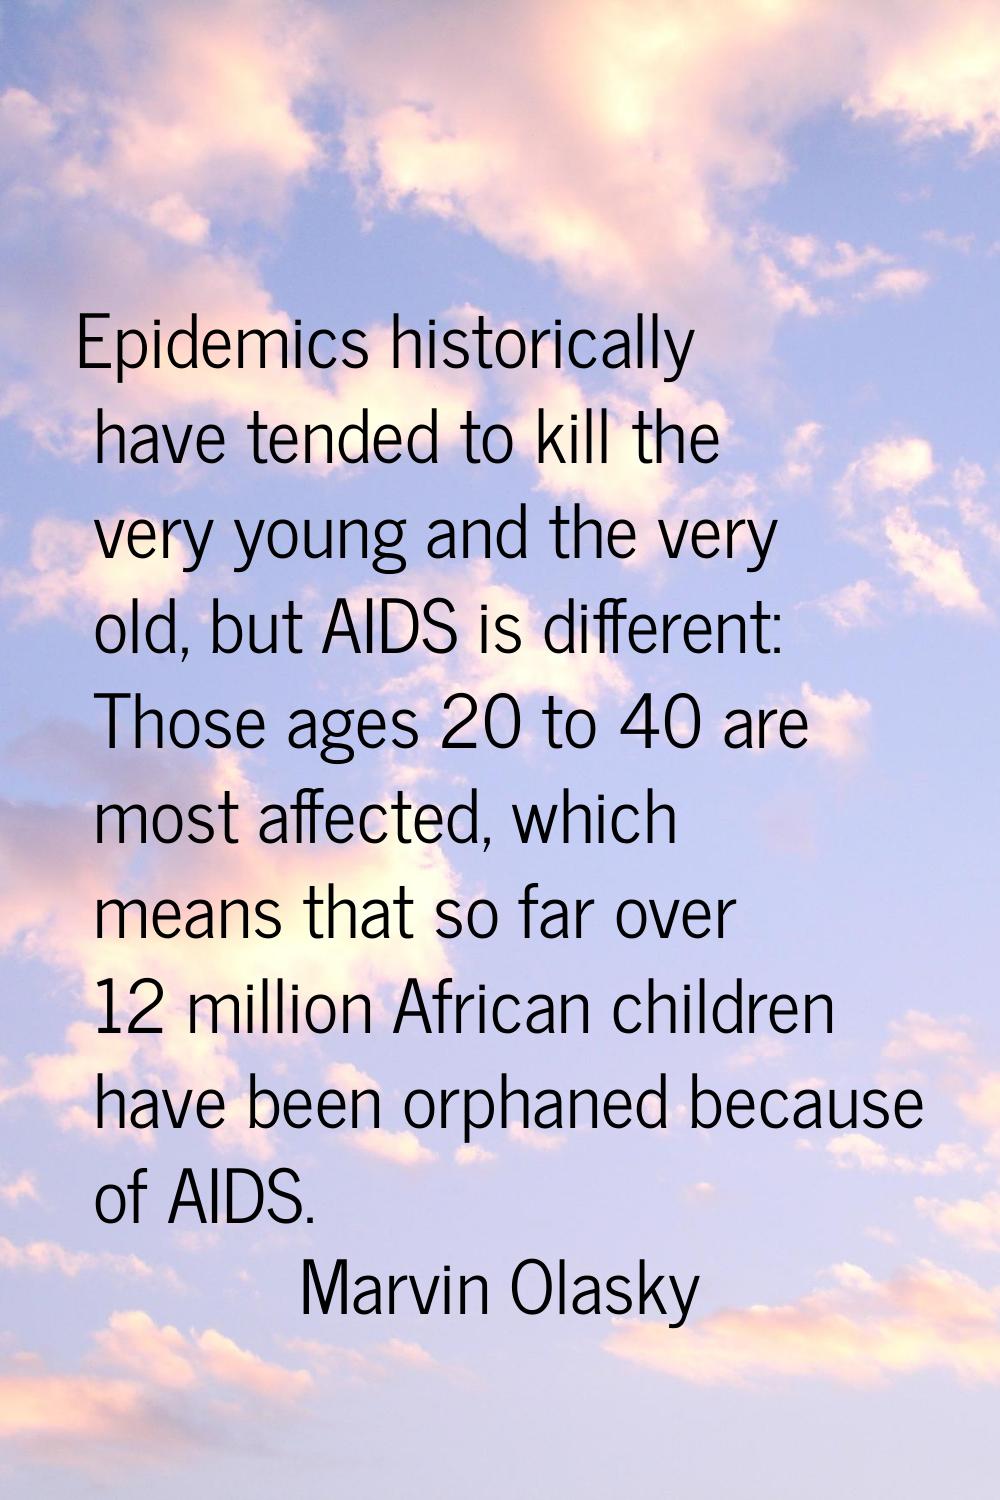 Epidemics historically have tended to kill the very young and the very old, but AIDS is different: 